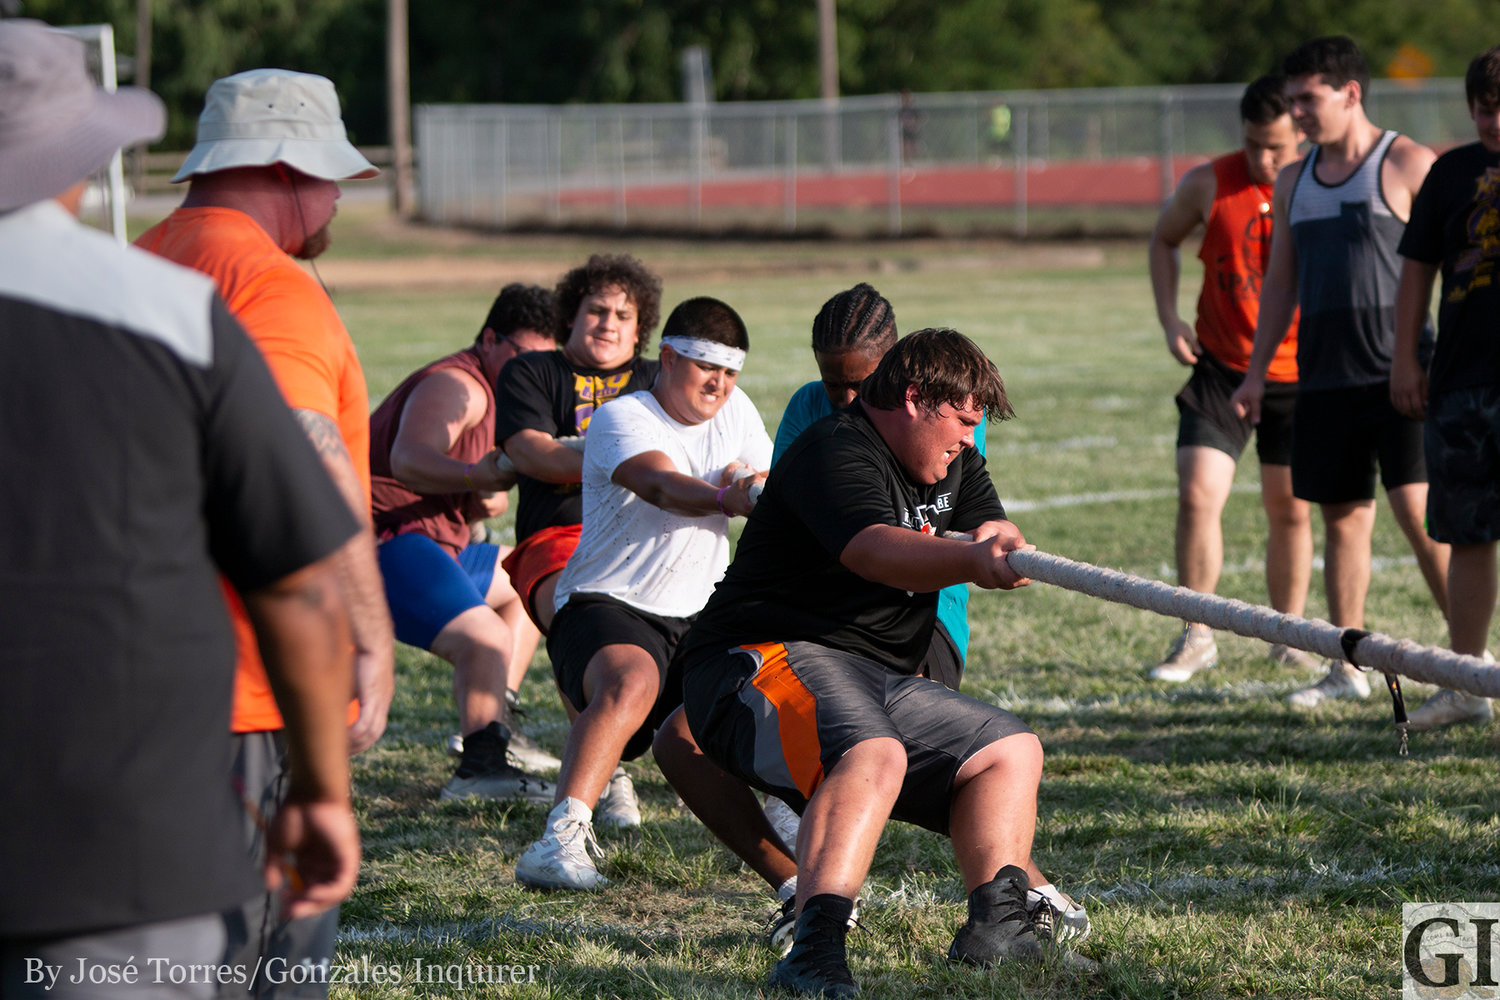 The Gonzales Apaches invited the Lockhart offensive linemen over to compete in a challenge as a tune-up before the state championship meet this upcoming weekend.